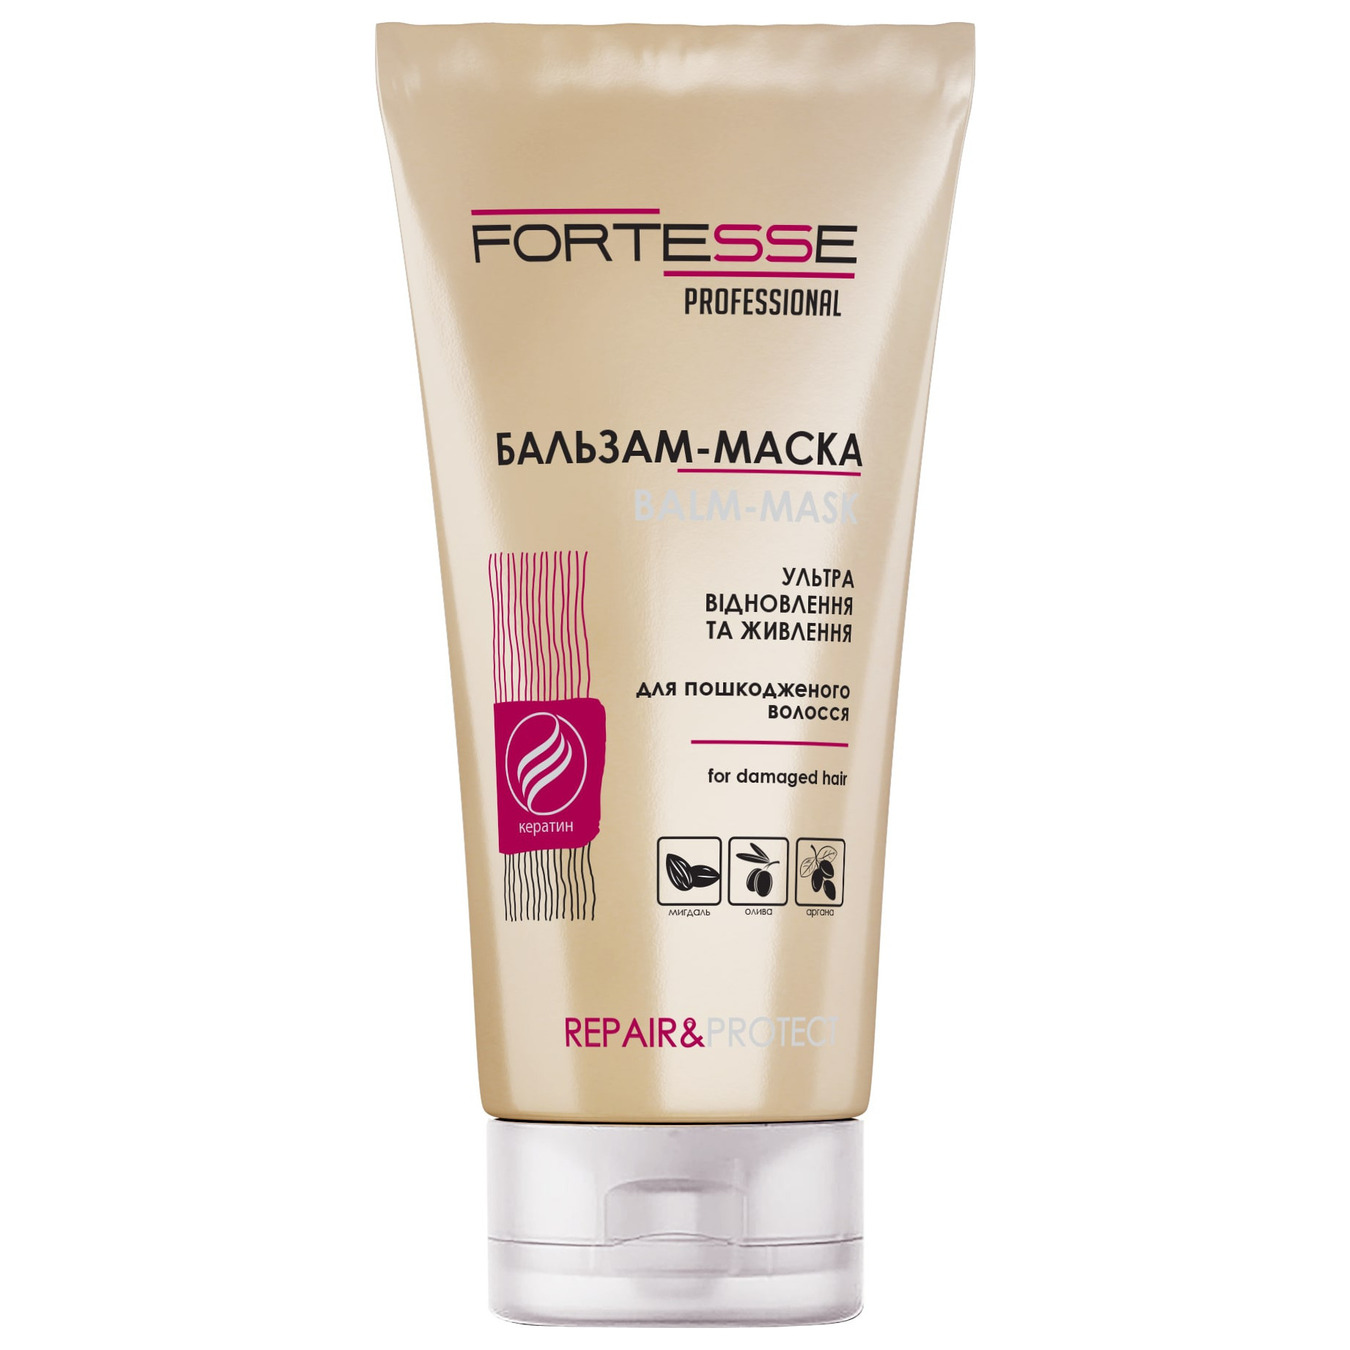 Balm-mask Fortesse Professional Repair&Protect restorative for dry damaged hair 200ml 2